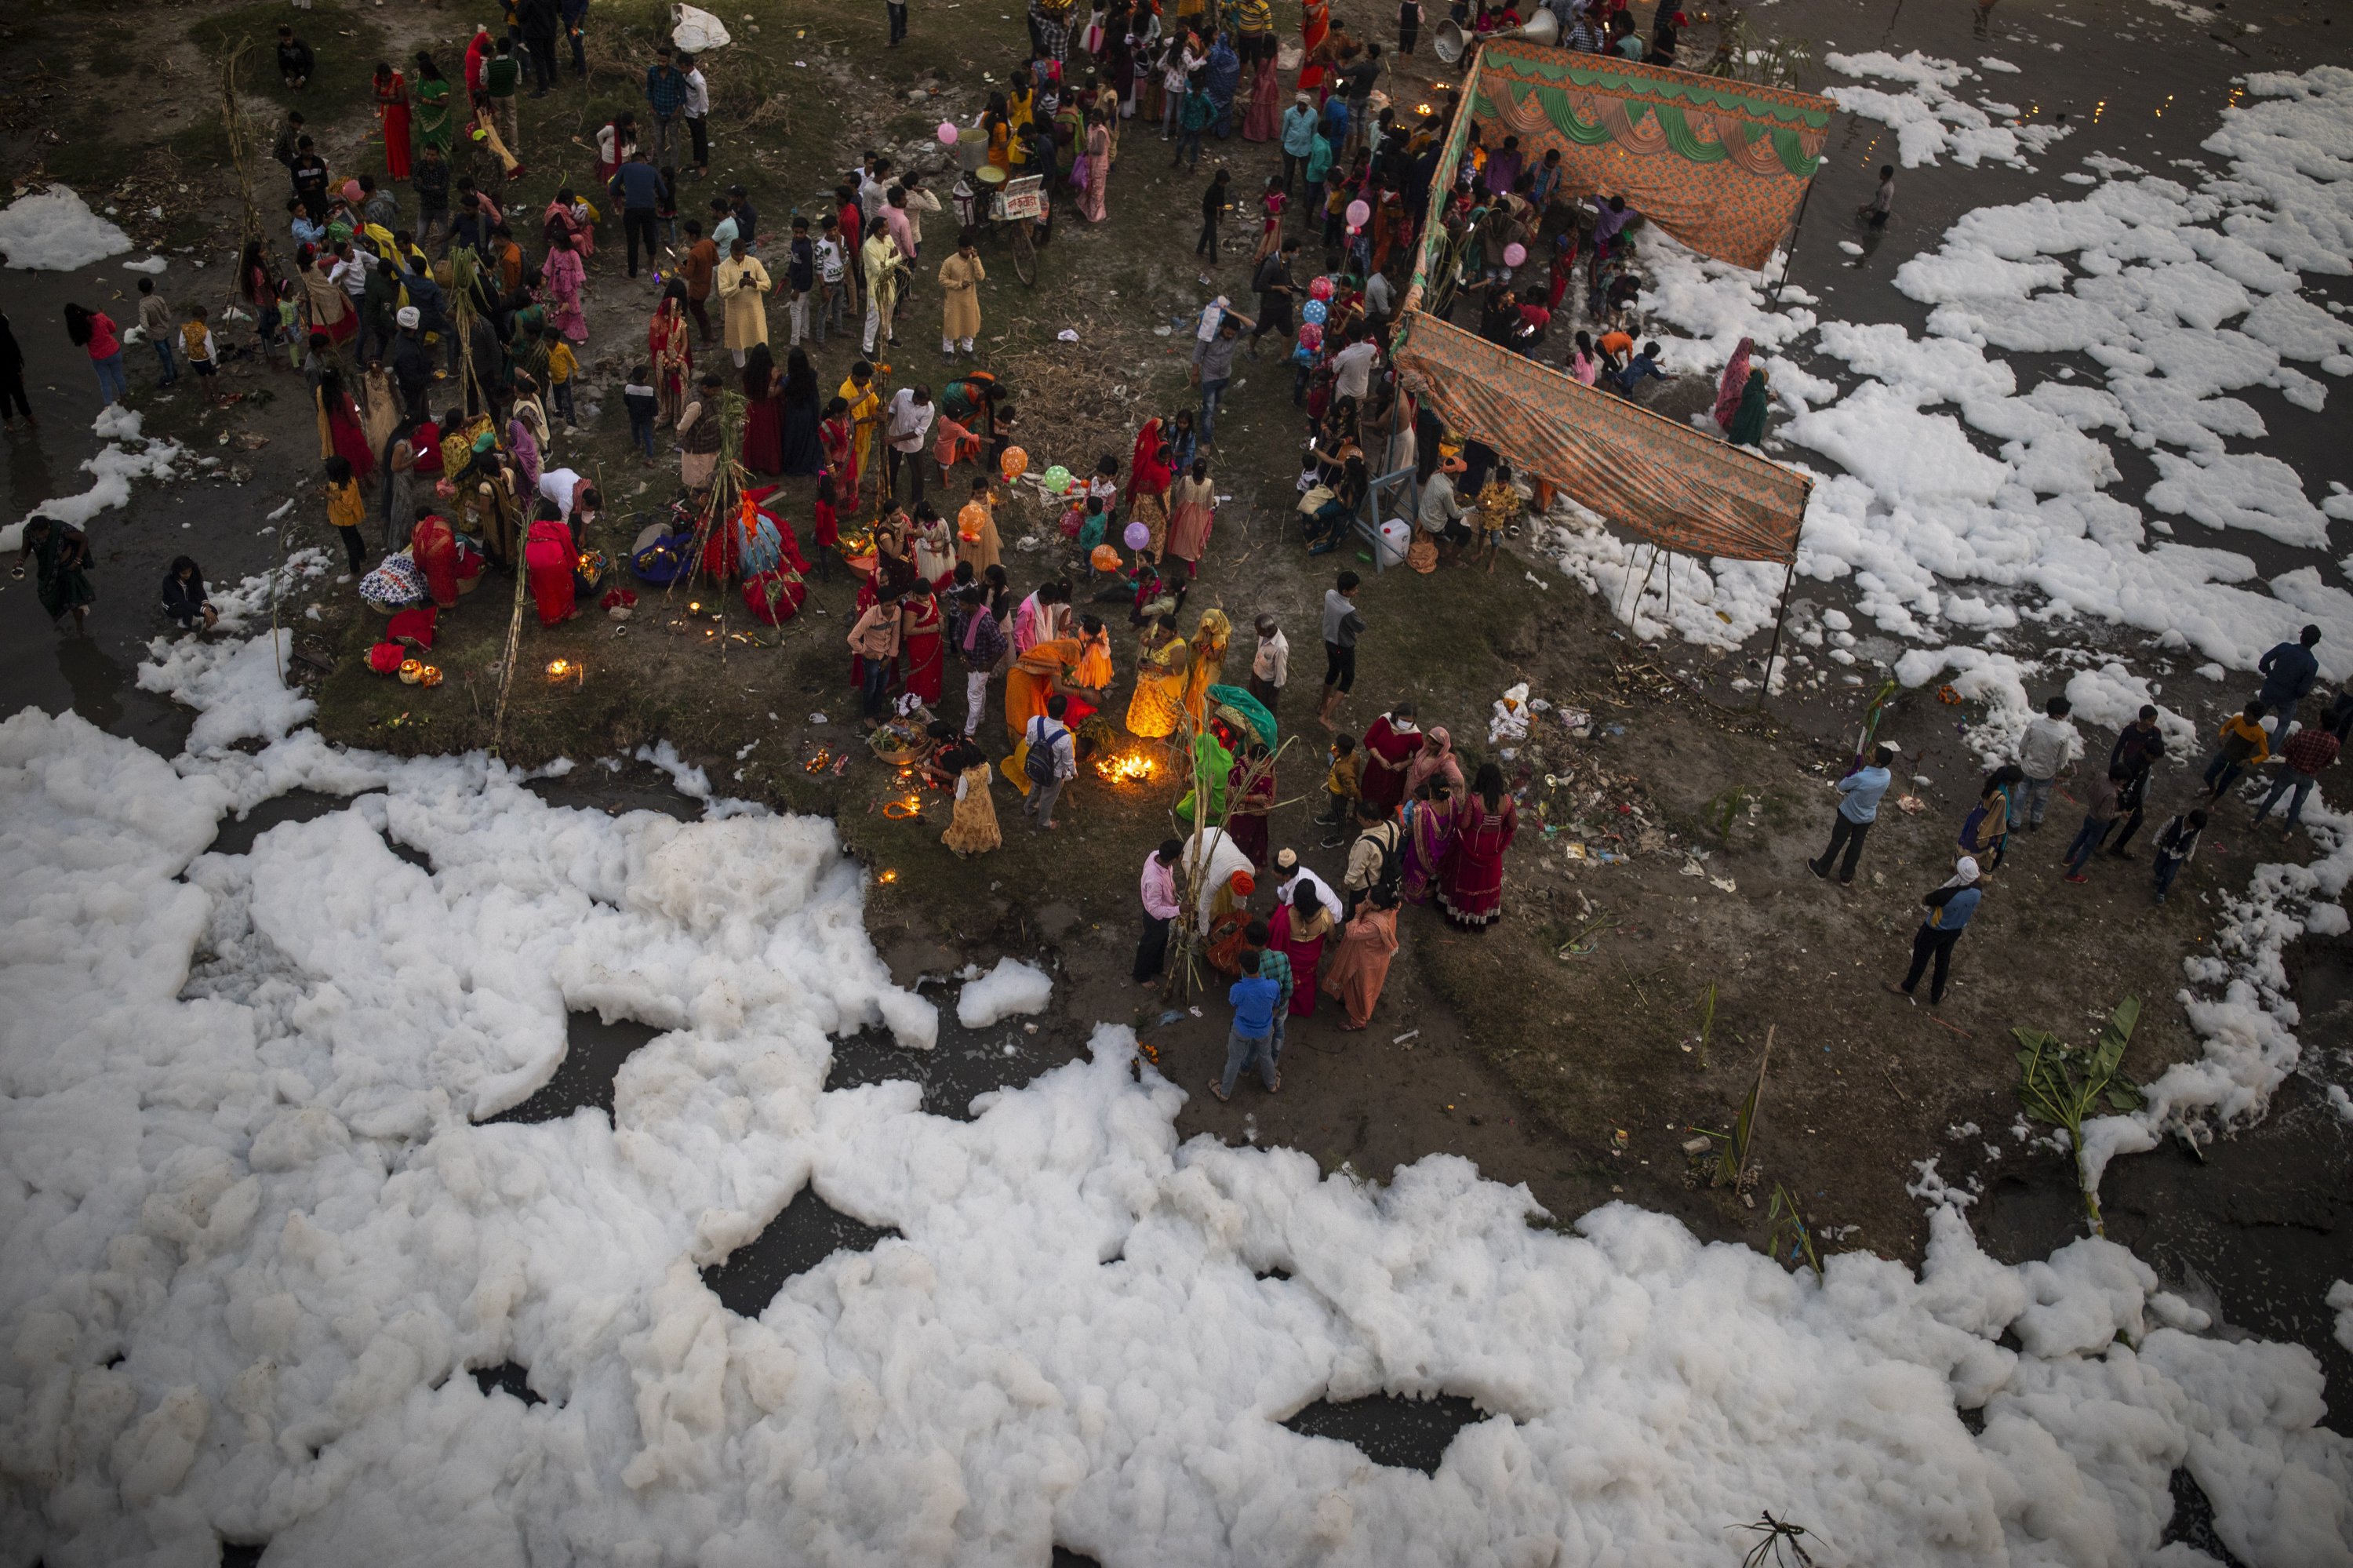 Indian Hindu devotees perform rituals on the banks of Yamuna river, covered by chemical foam caused due to industrial and domestic pollution, during Chhath Puja festival in New Delhi, India, Nov. 10, 2021. (AP Photo)